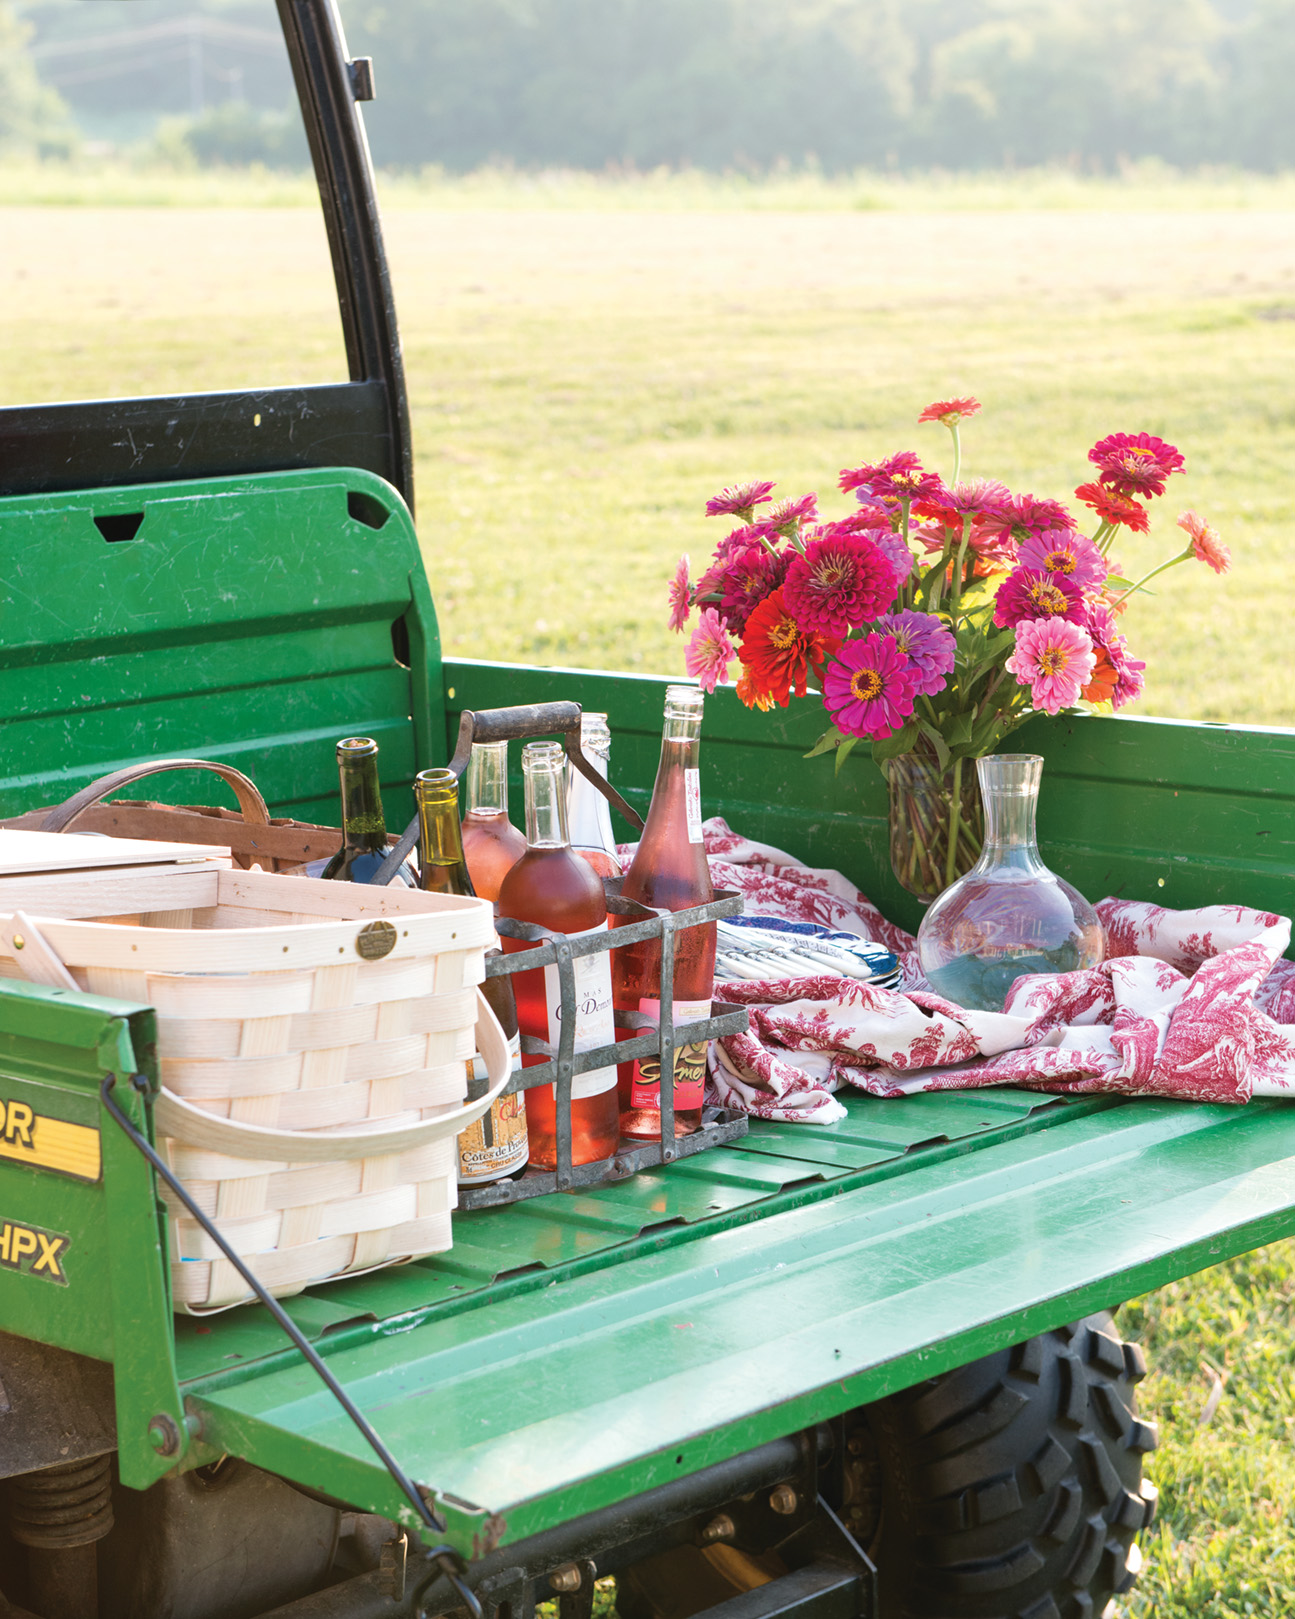 Tractor picnic scene from Julia Reed's South